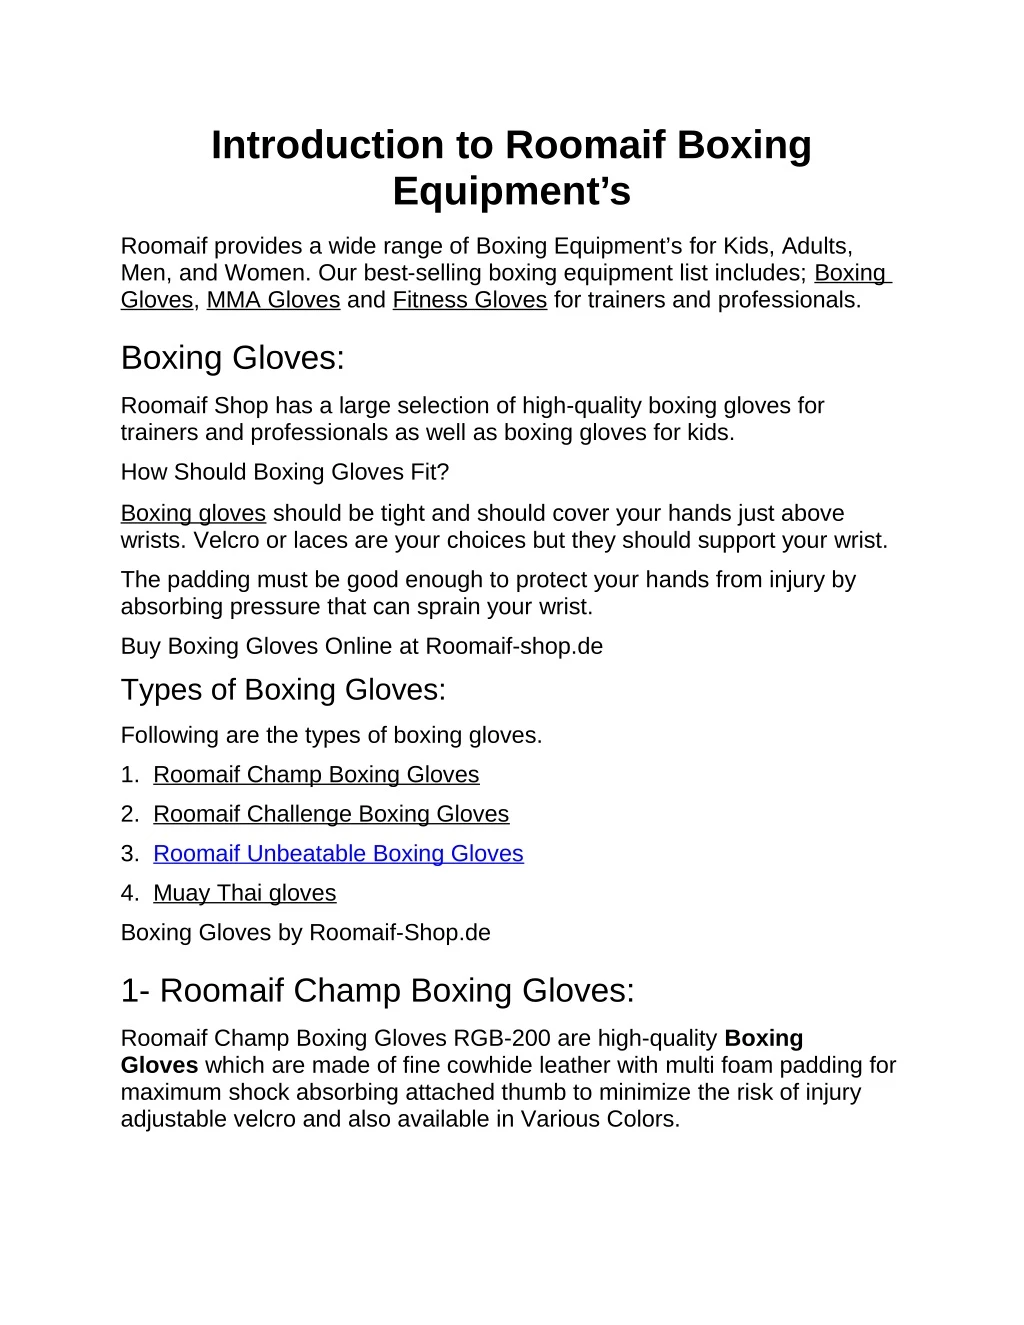 introduction to roomaif boxing equipment s